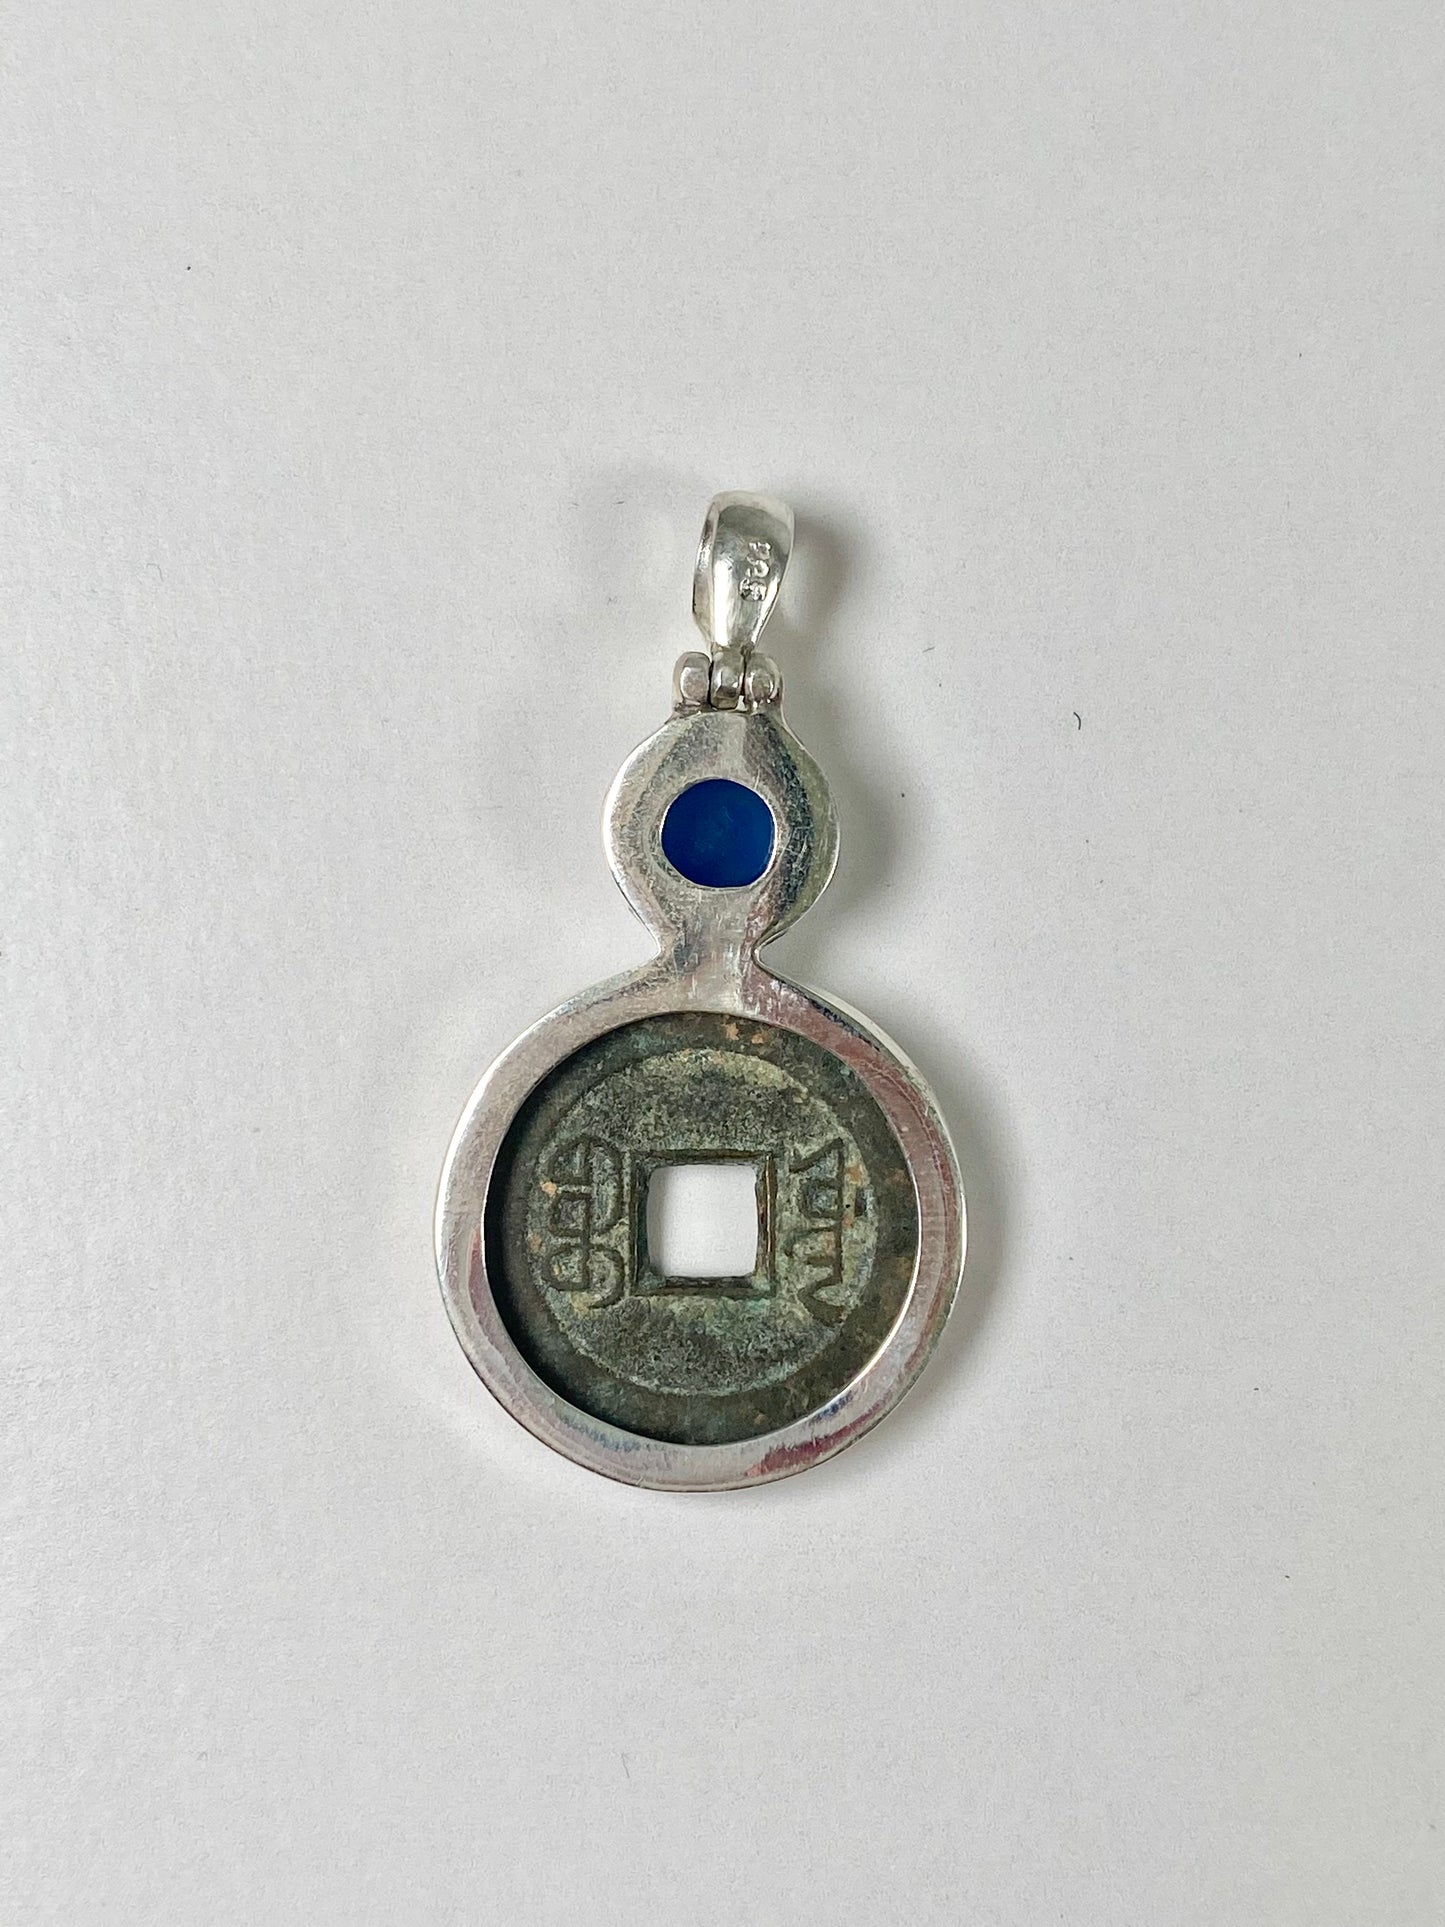 Antique Qing Dynasty Jia Qing Reign (1796-1820) Cash Coin Pendant in Sterling Silver w Blue Agate